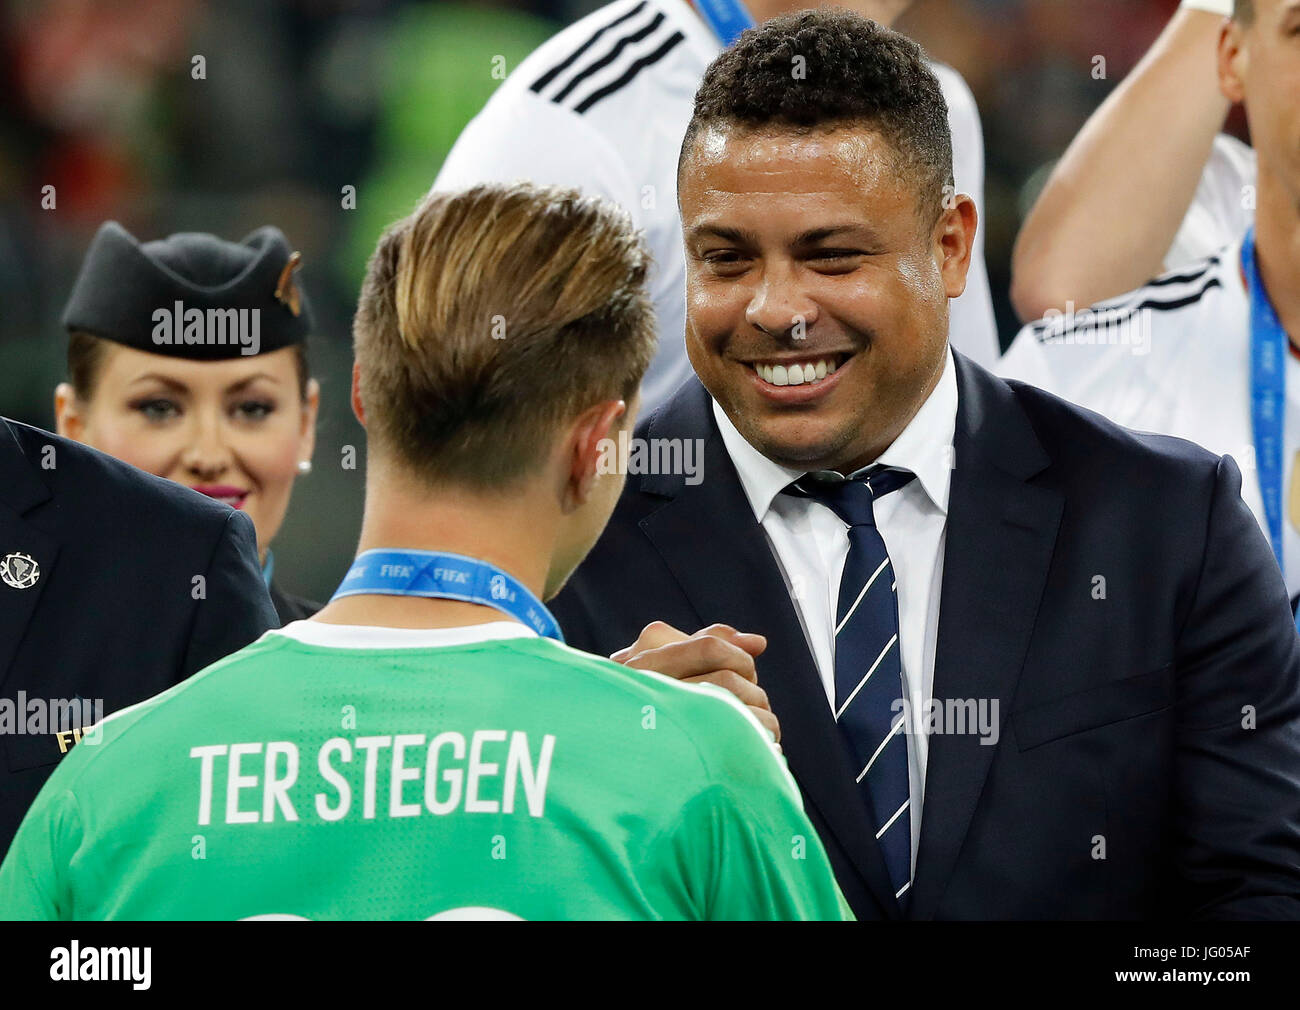 St. Petersburg, Russia. 2nd July, 2017. Marc-Andre TER STEGEN of Germany and former player Ronaldo do Brasil after the match between Chile and Germany valid for the final of the 2017 Confederations Cup on Sunday (2), held at the Krestovsky Stadium (Arena Zenit) in St. Petersburg, Russia. (Photo: Rodolfo Buhrer/La Imagem/Fotoarena) Stock Photo